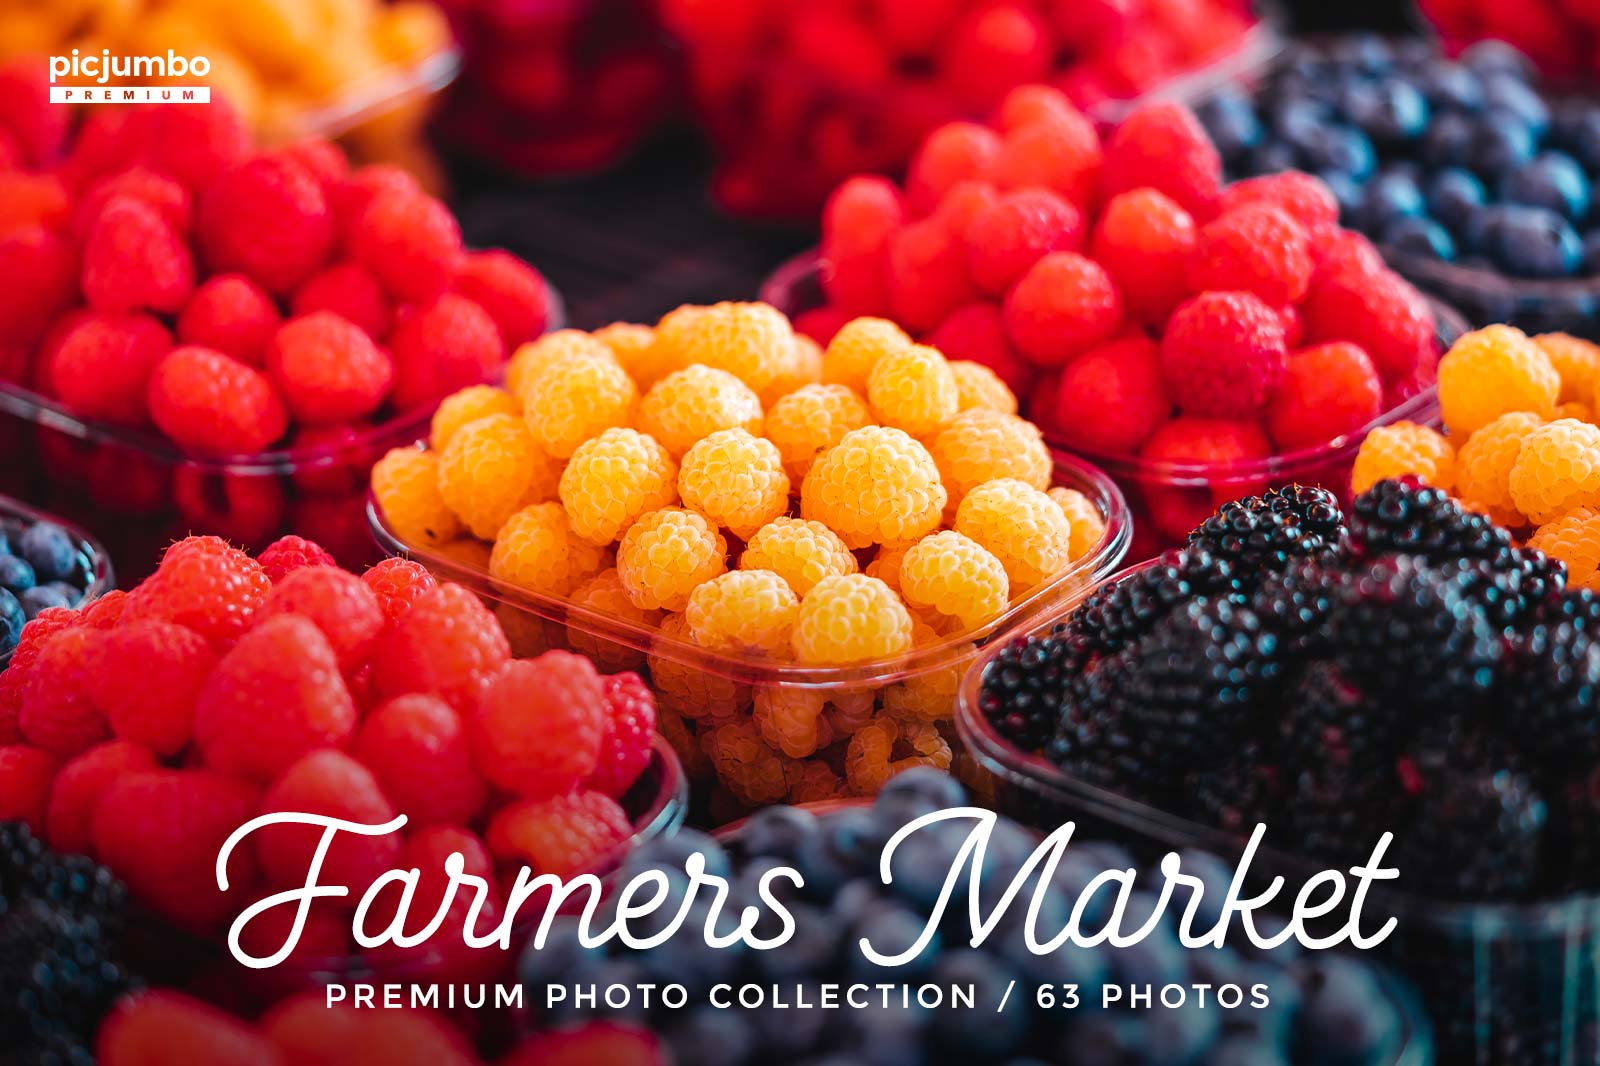 Farmers Market Stock Photo Collection